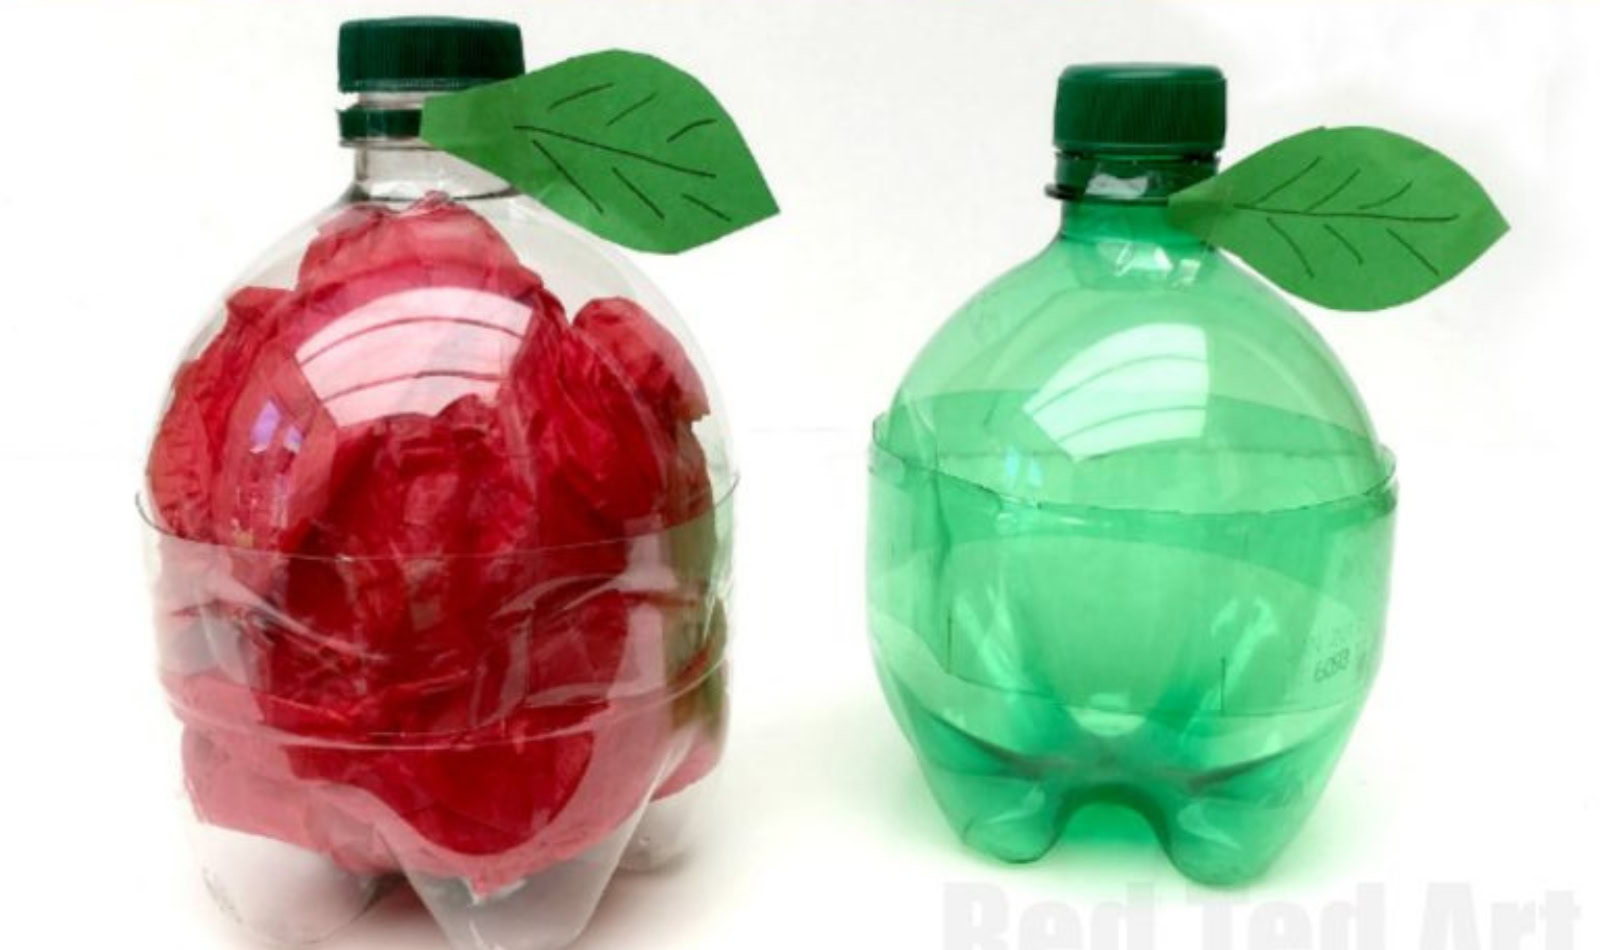 Image of two plastic soda bottles that have been cut and turned into plastic apples.